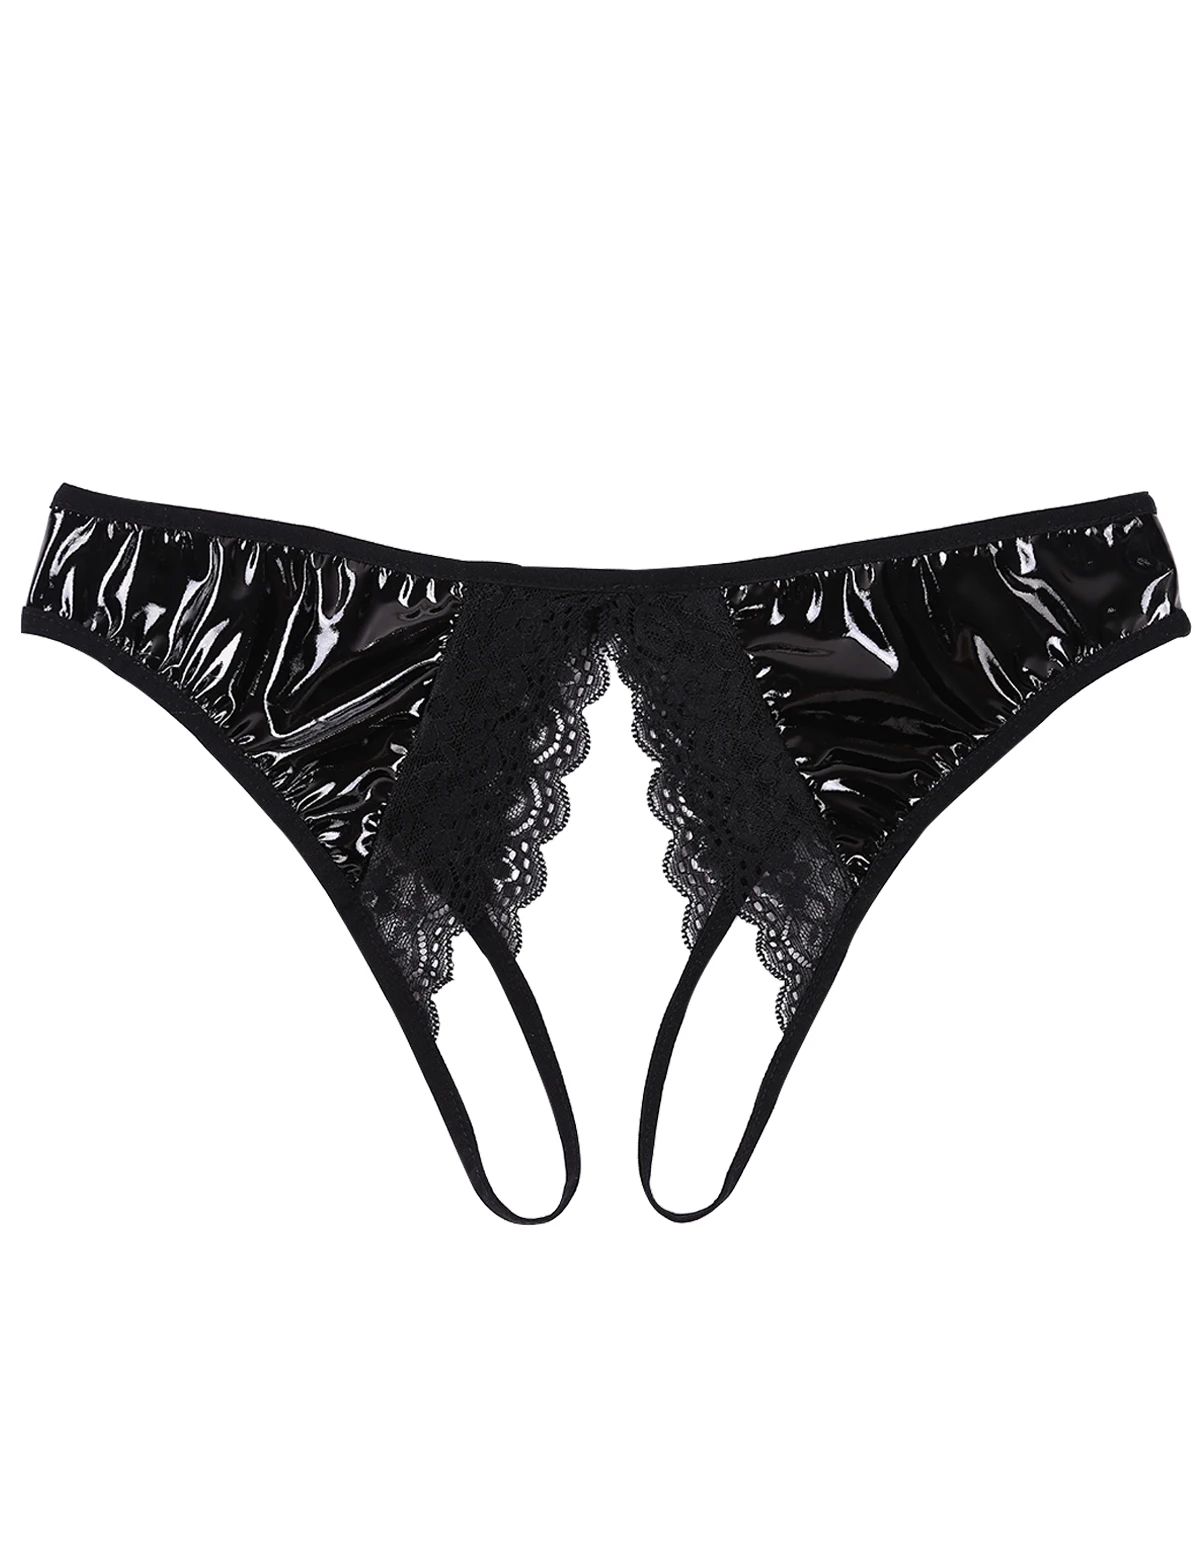 Women Lingerie Femme Wet Look Leather Crotchless Jockstrap Lace Edge Cheeky Hipster Briefs Underwear Open Crotch Sexy Panties